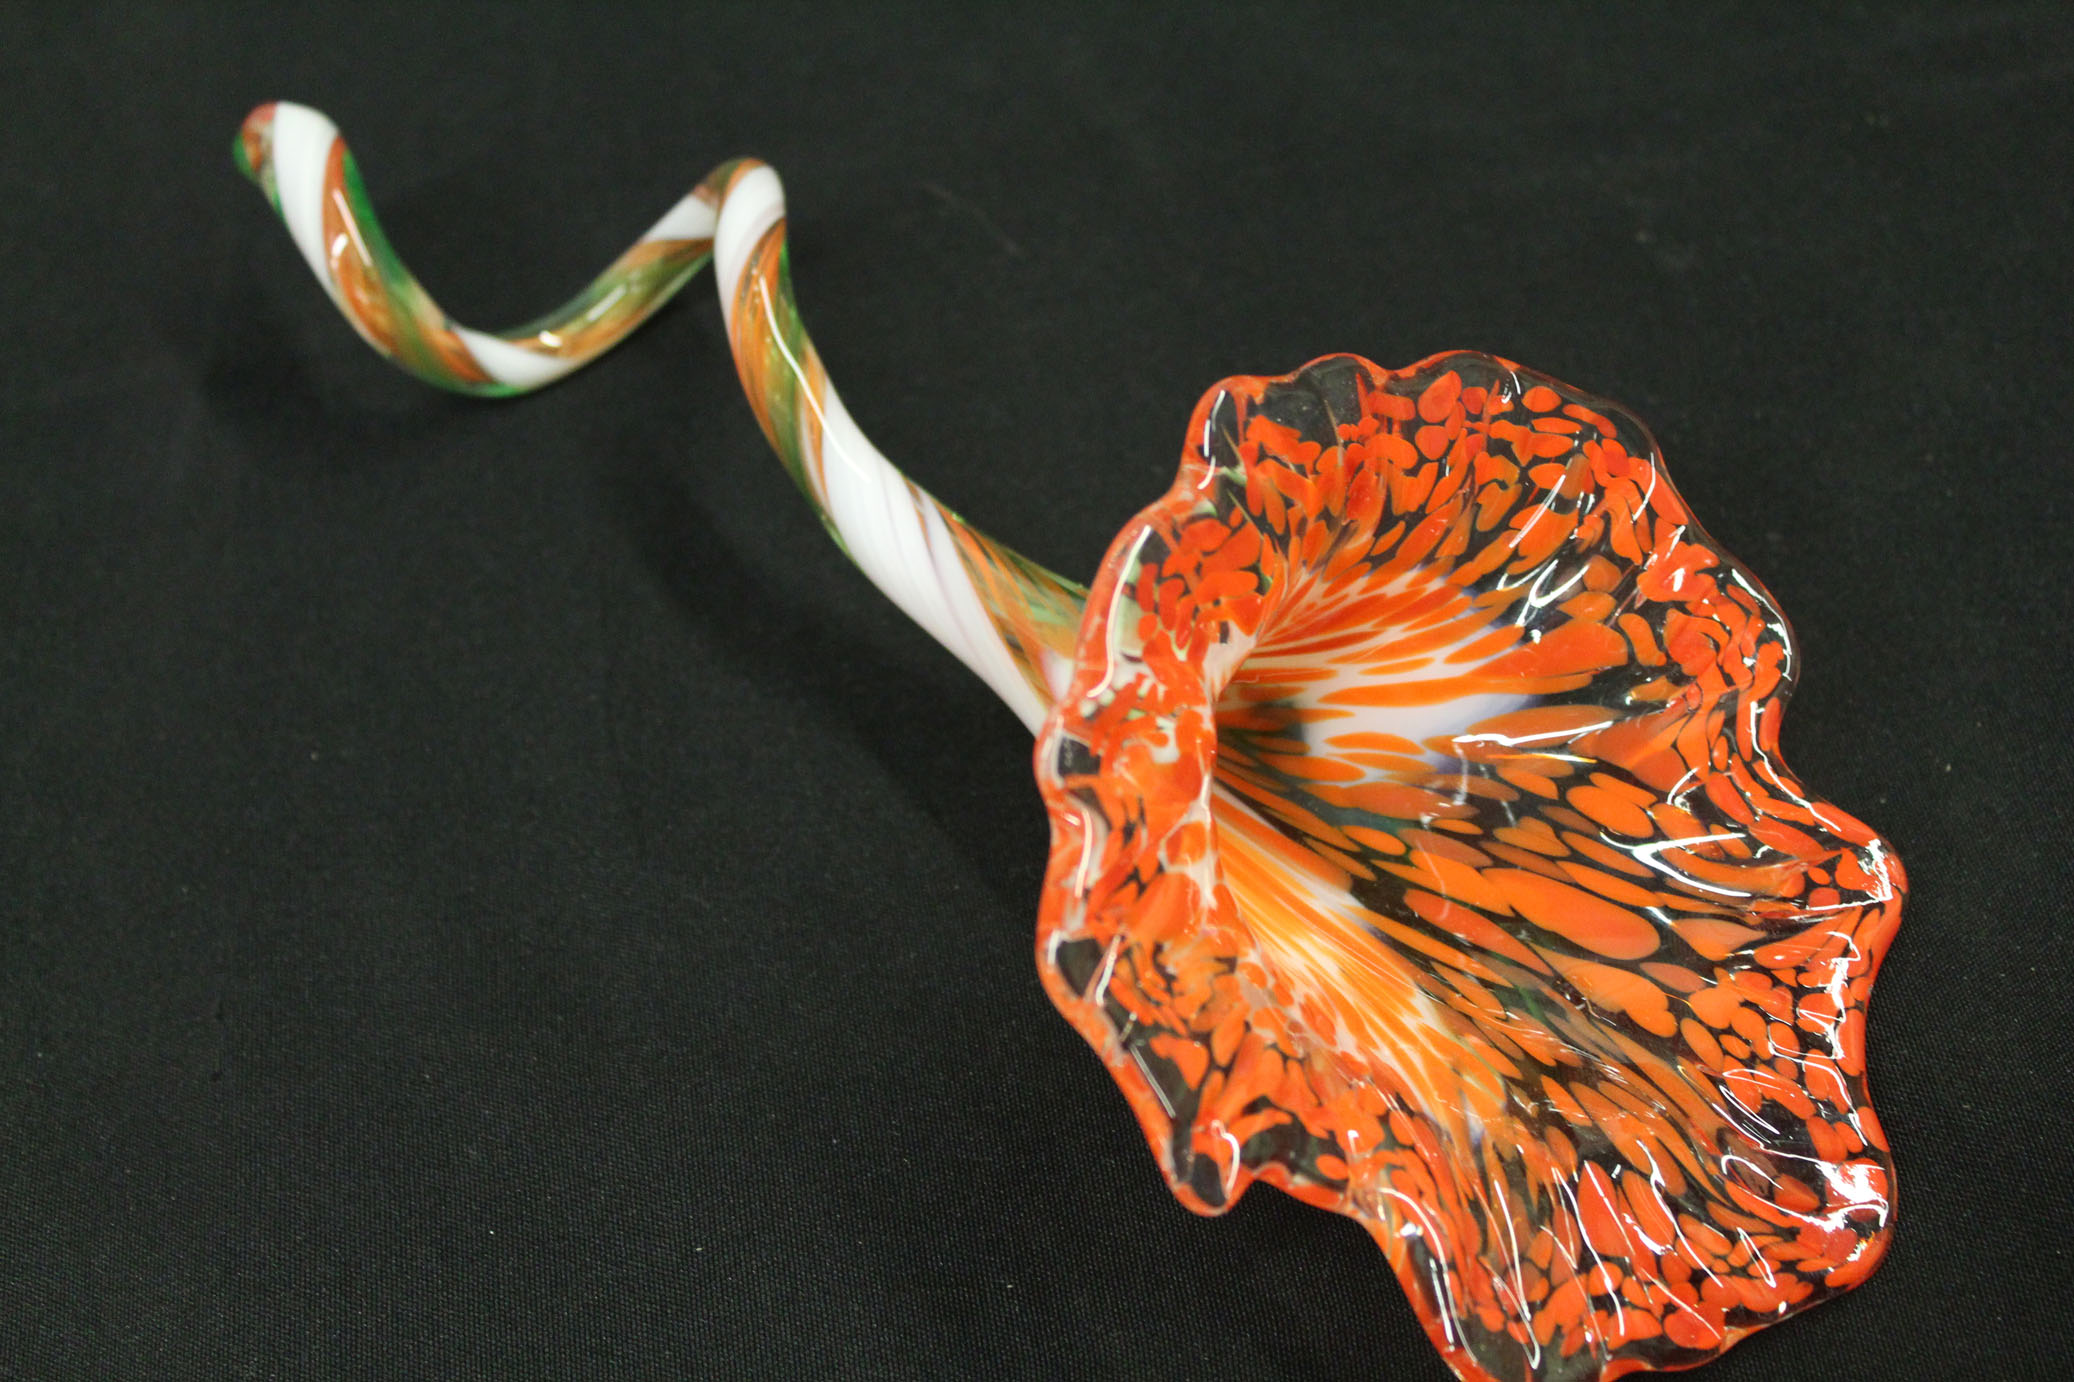 GRT Hot Glass Studio is hosting a 2 to 3 hour class where you can create a glas...